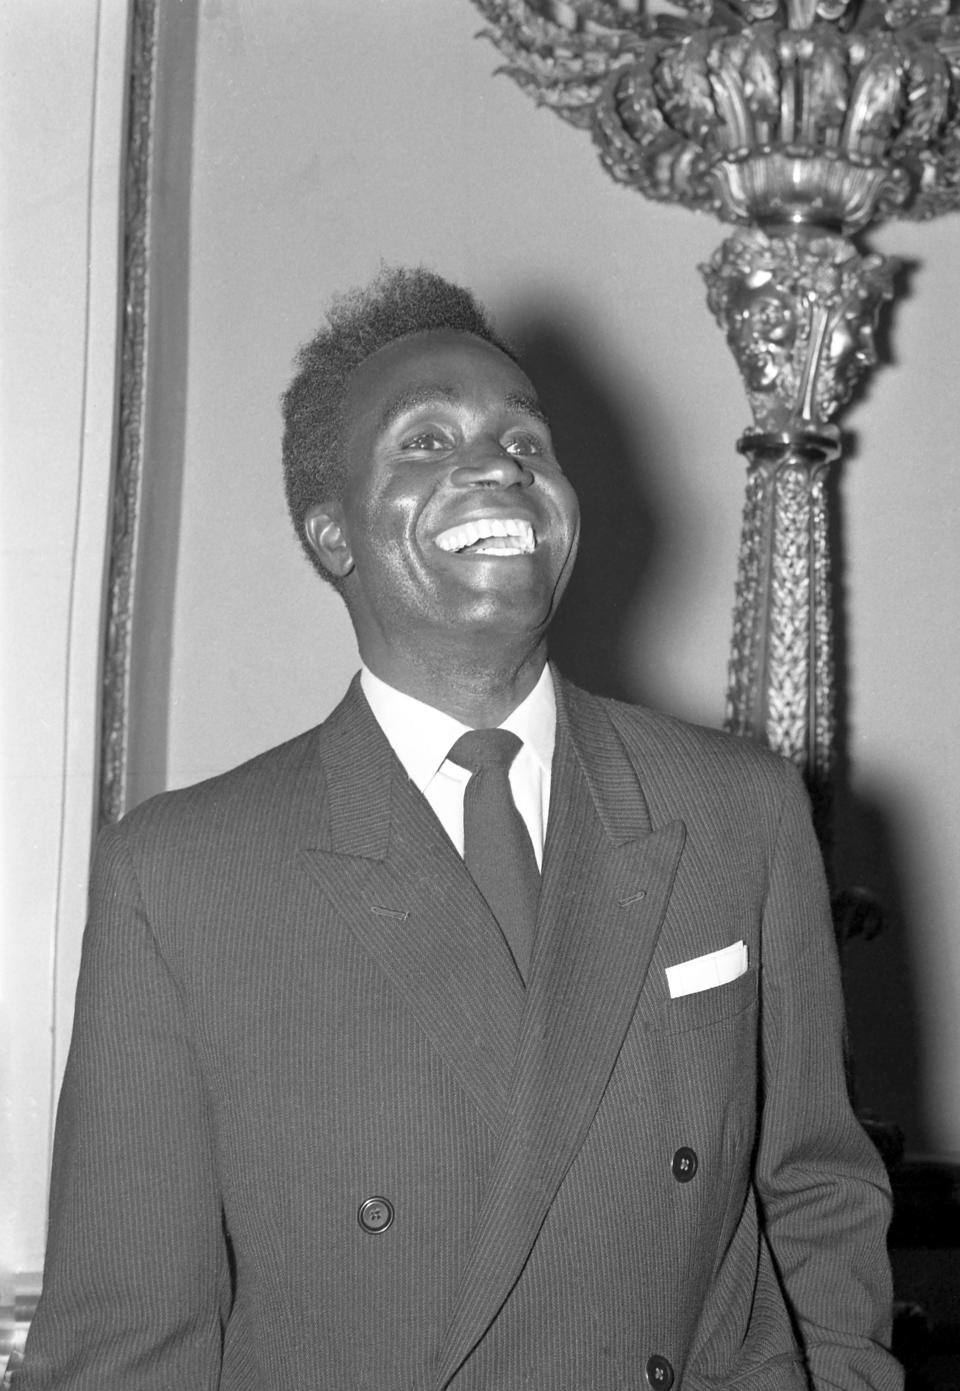 FILE - In this Dec. 5, 1960 file photo, Kenneth Kaunda, then leader of the United National Independence Party in the then Northern Rhodesia, now Zambia, laughs as he poses on arrival at Lancaster House, London for the opening by British Prime Minister Harold Macmillan of the Central African Federal Review Conference. Zambia’s first president Kenneth Kaunda has died at the age of 97, the country's president Edward Lungu announced Thursday June 17, 2021. (AP Photo/Laurence Harris, File)